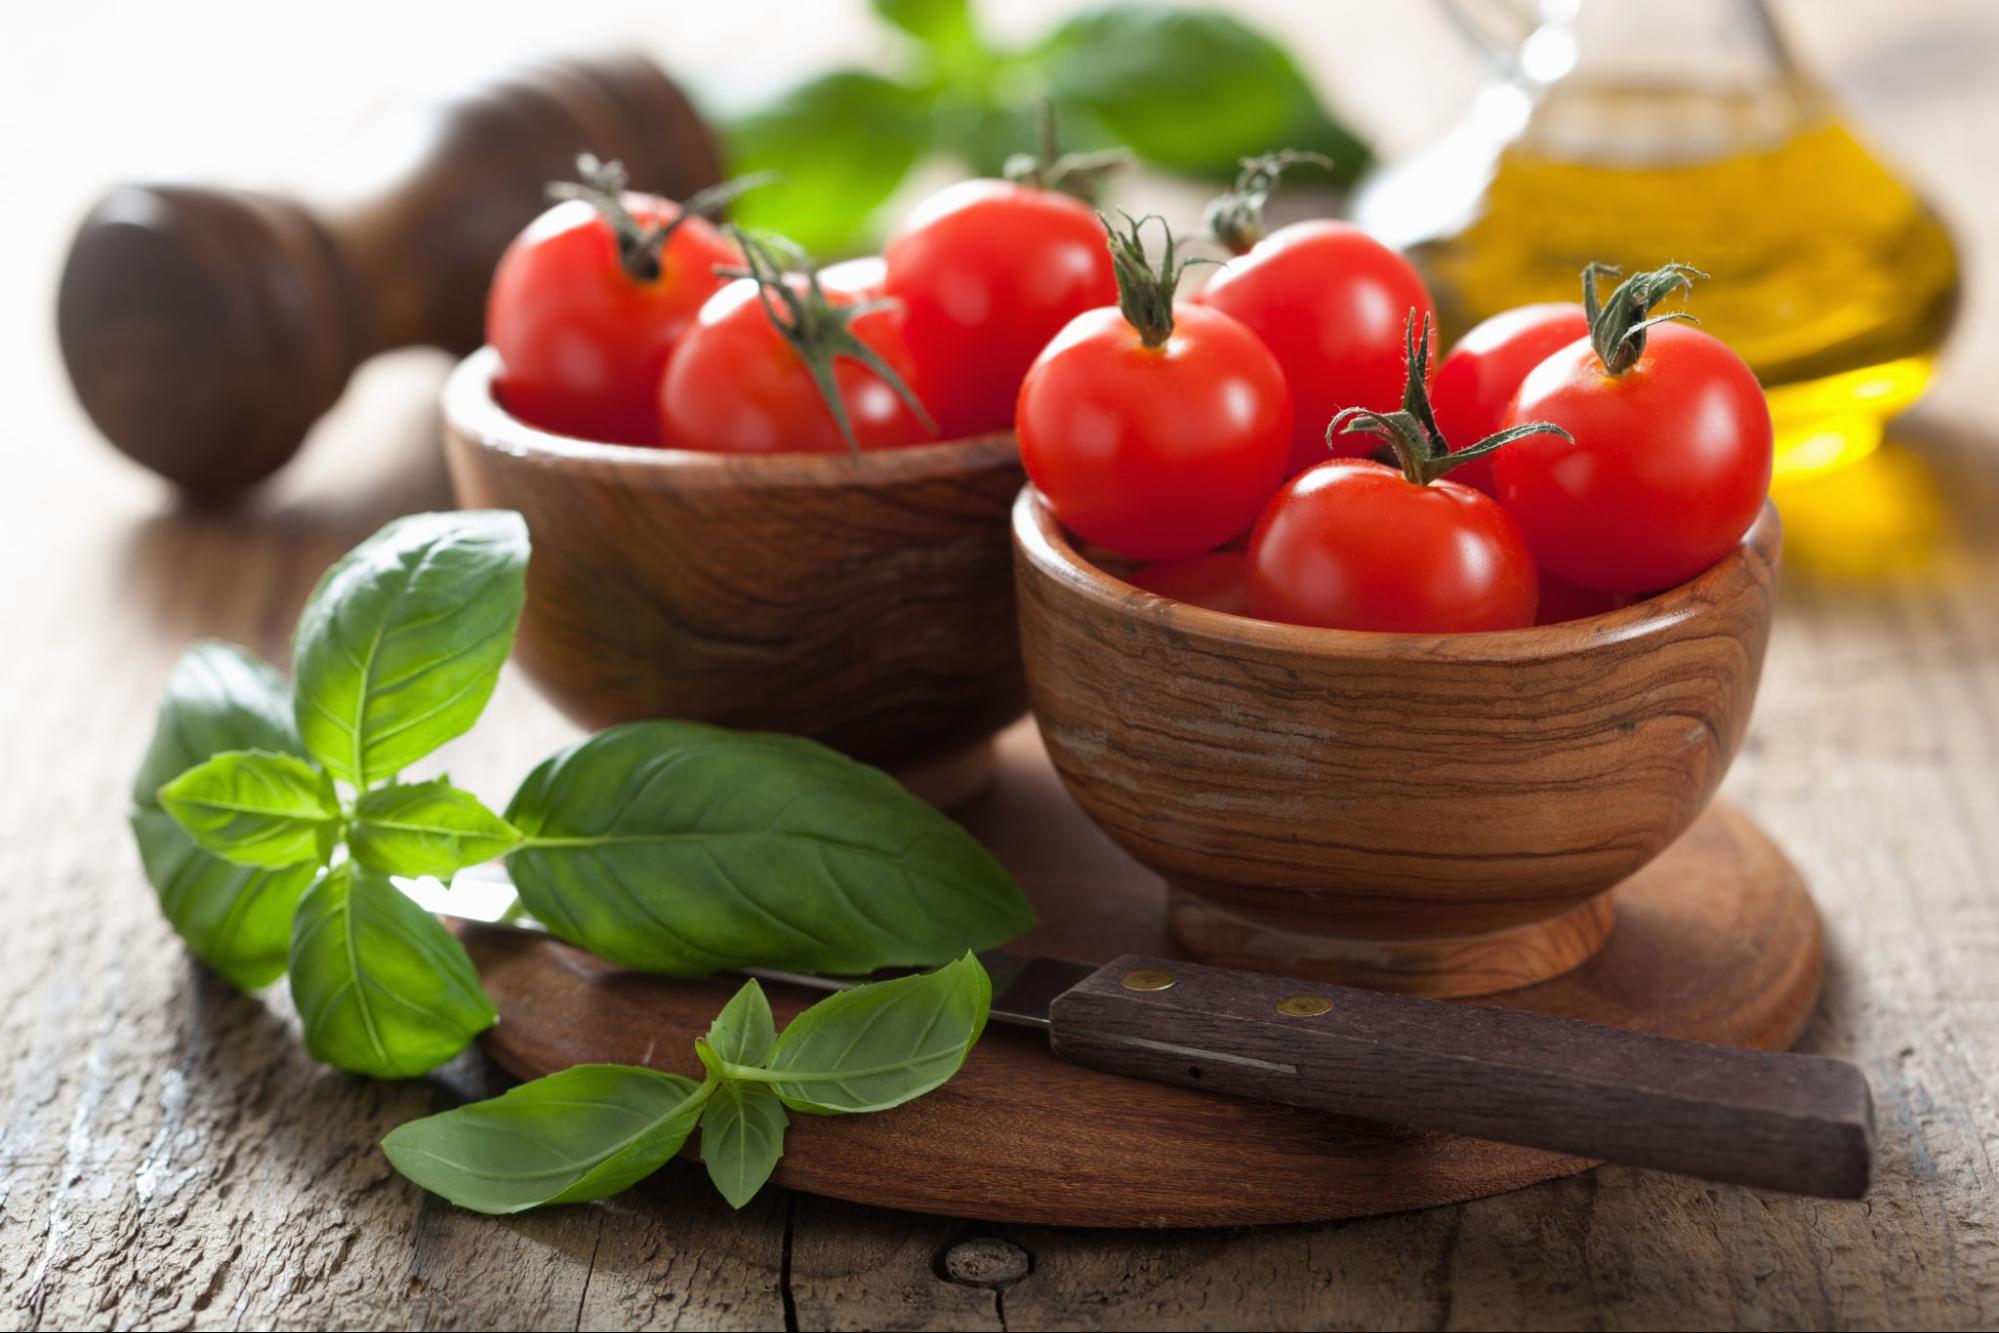 Different Types Of Tomatoes For Slicing, Salads, & More